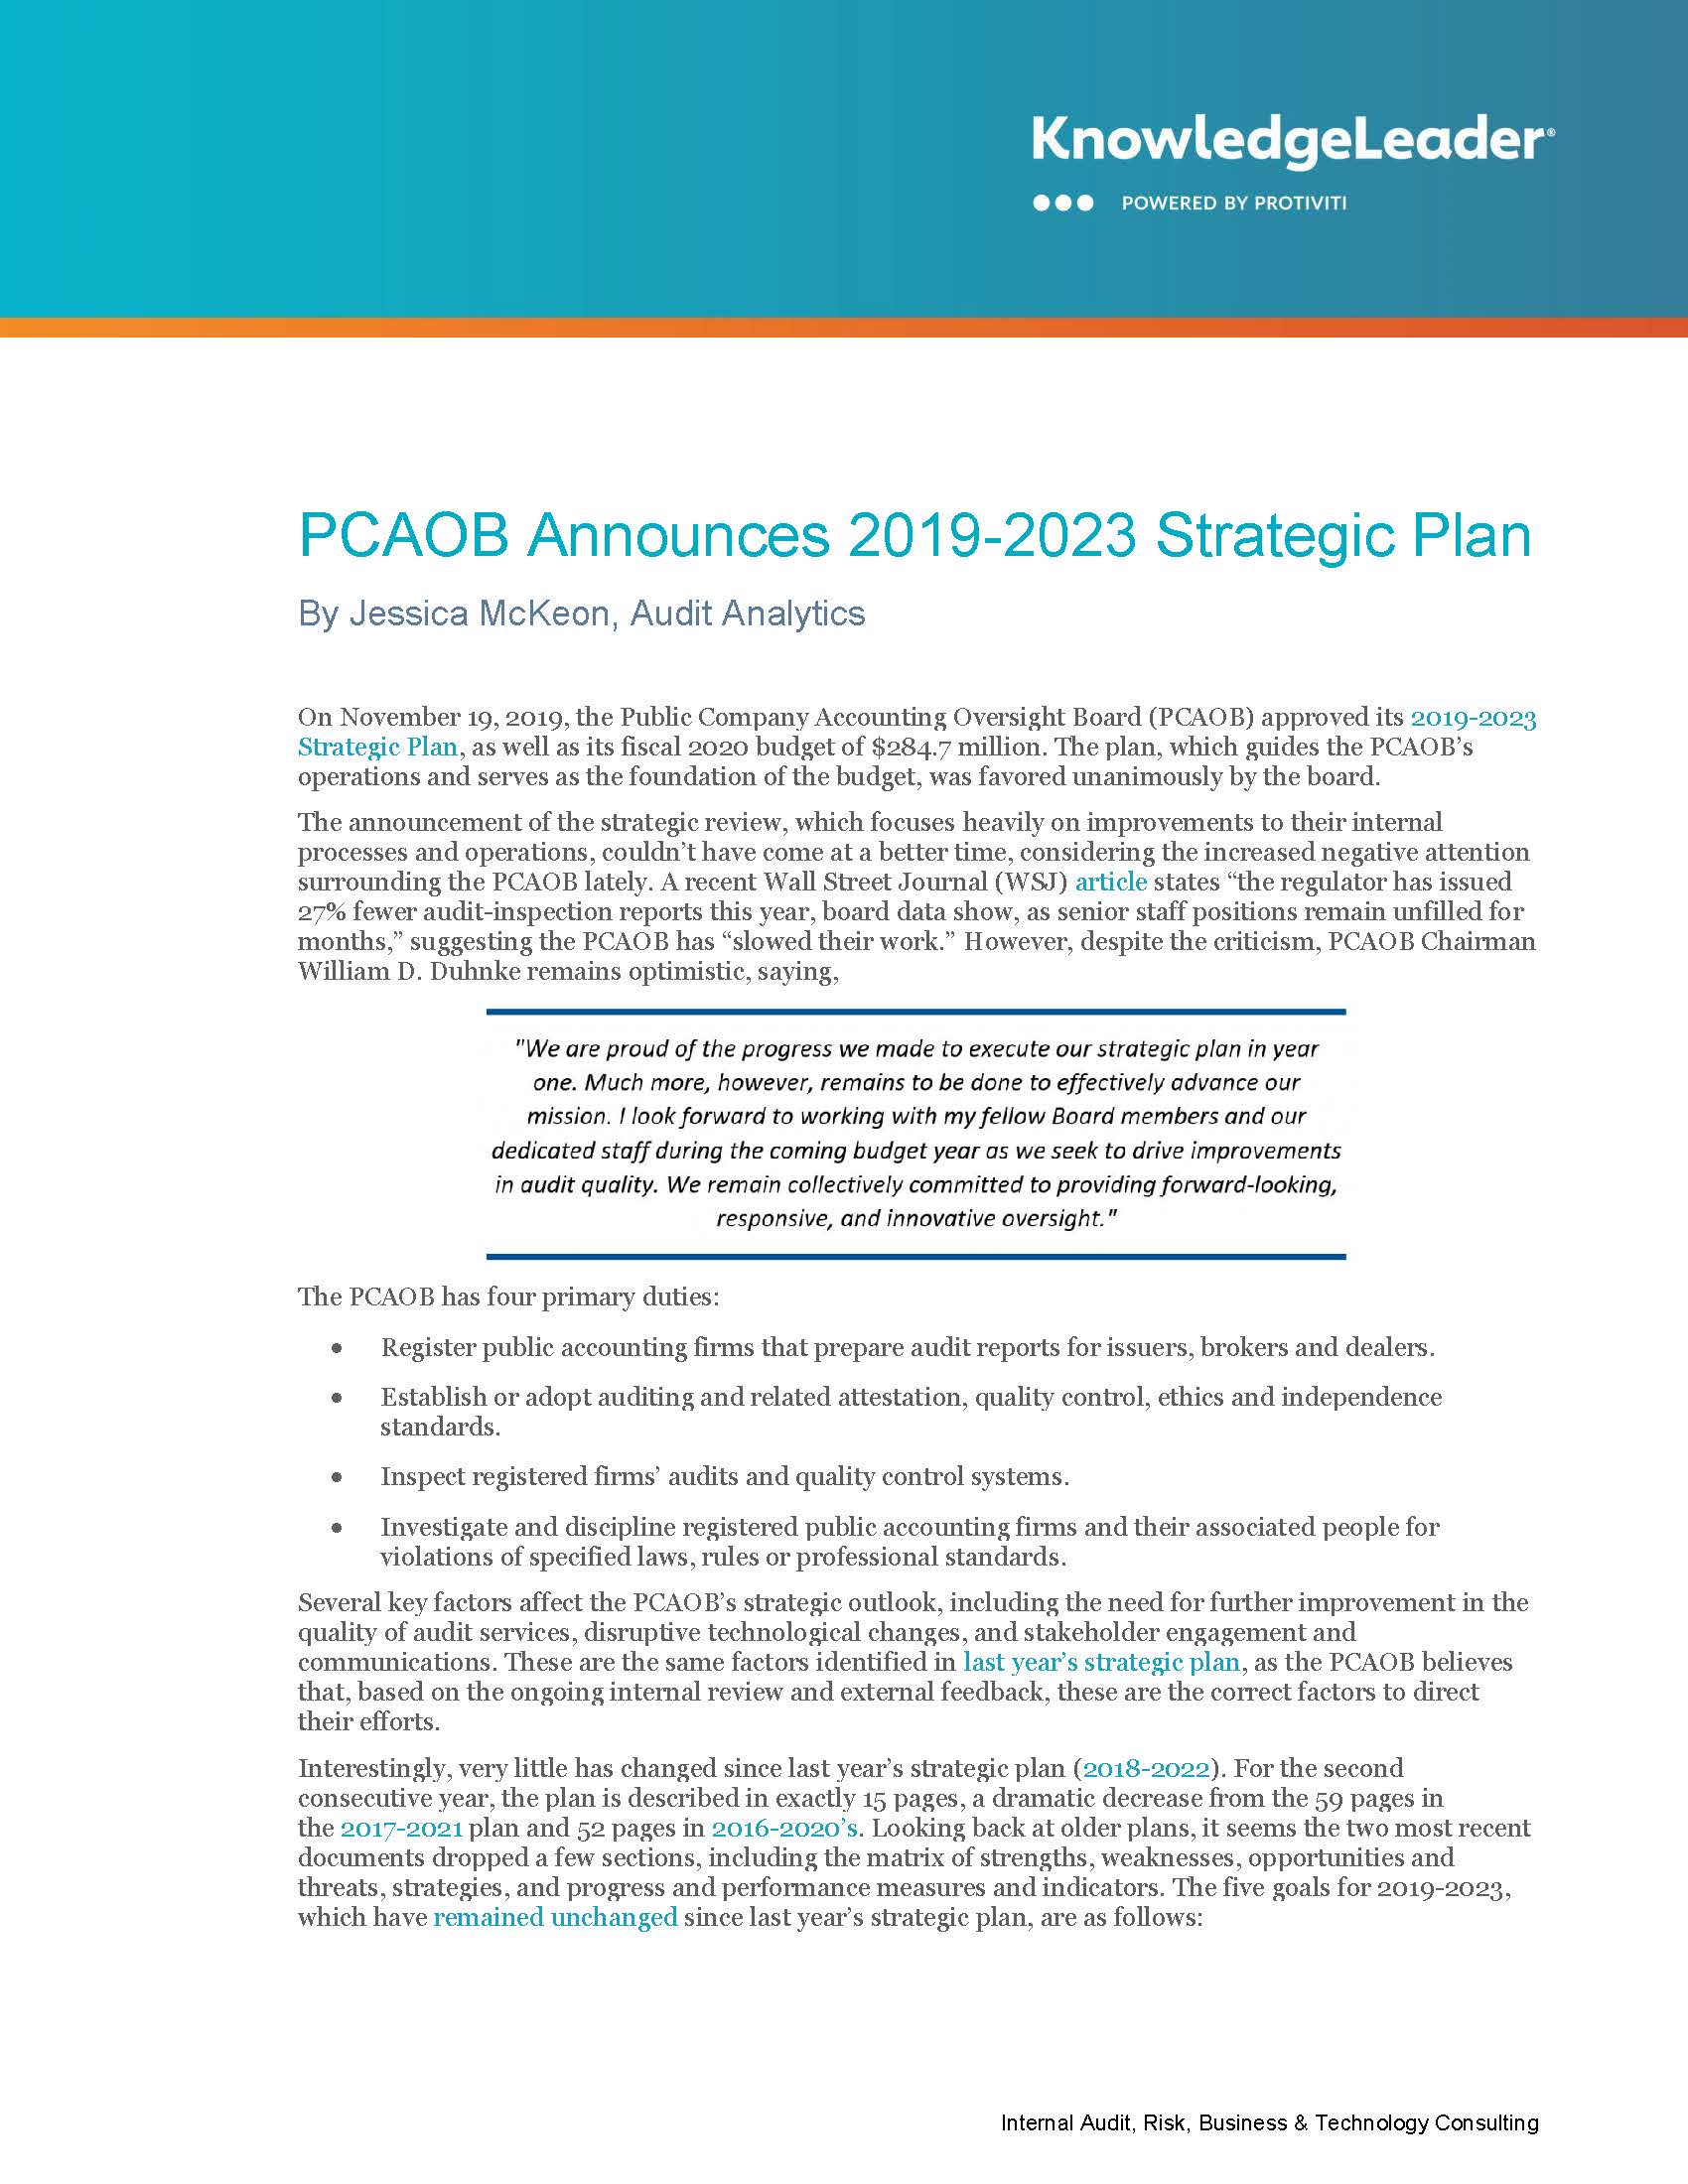 Screenshot of the first page of PCAOB Announces 2019-2023 Strategic Plan